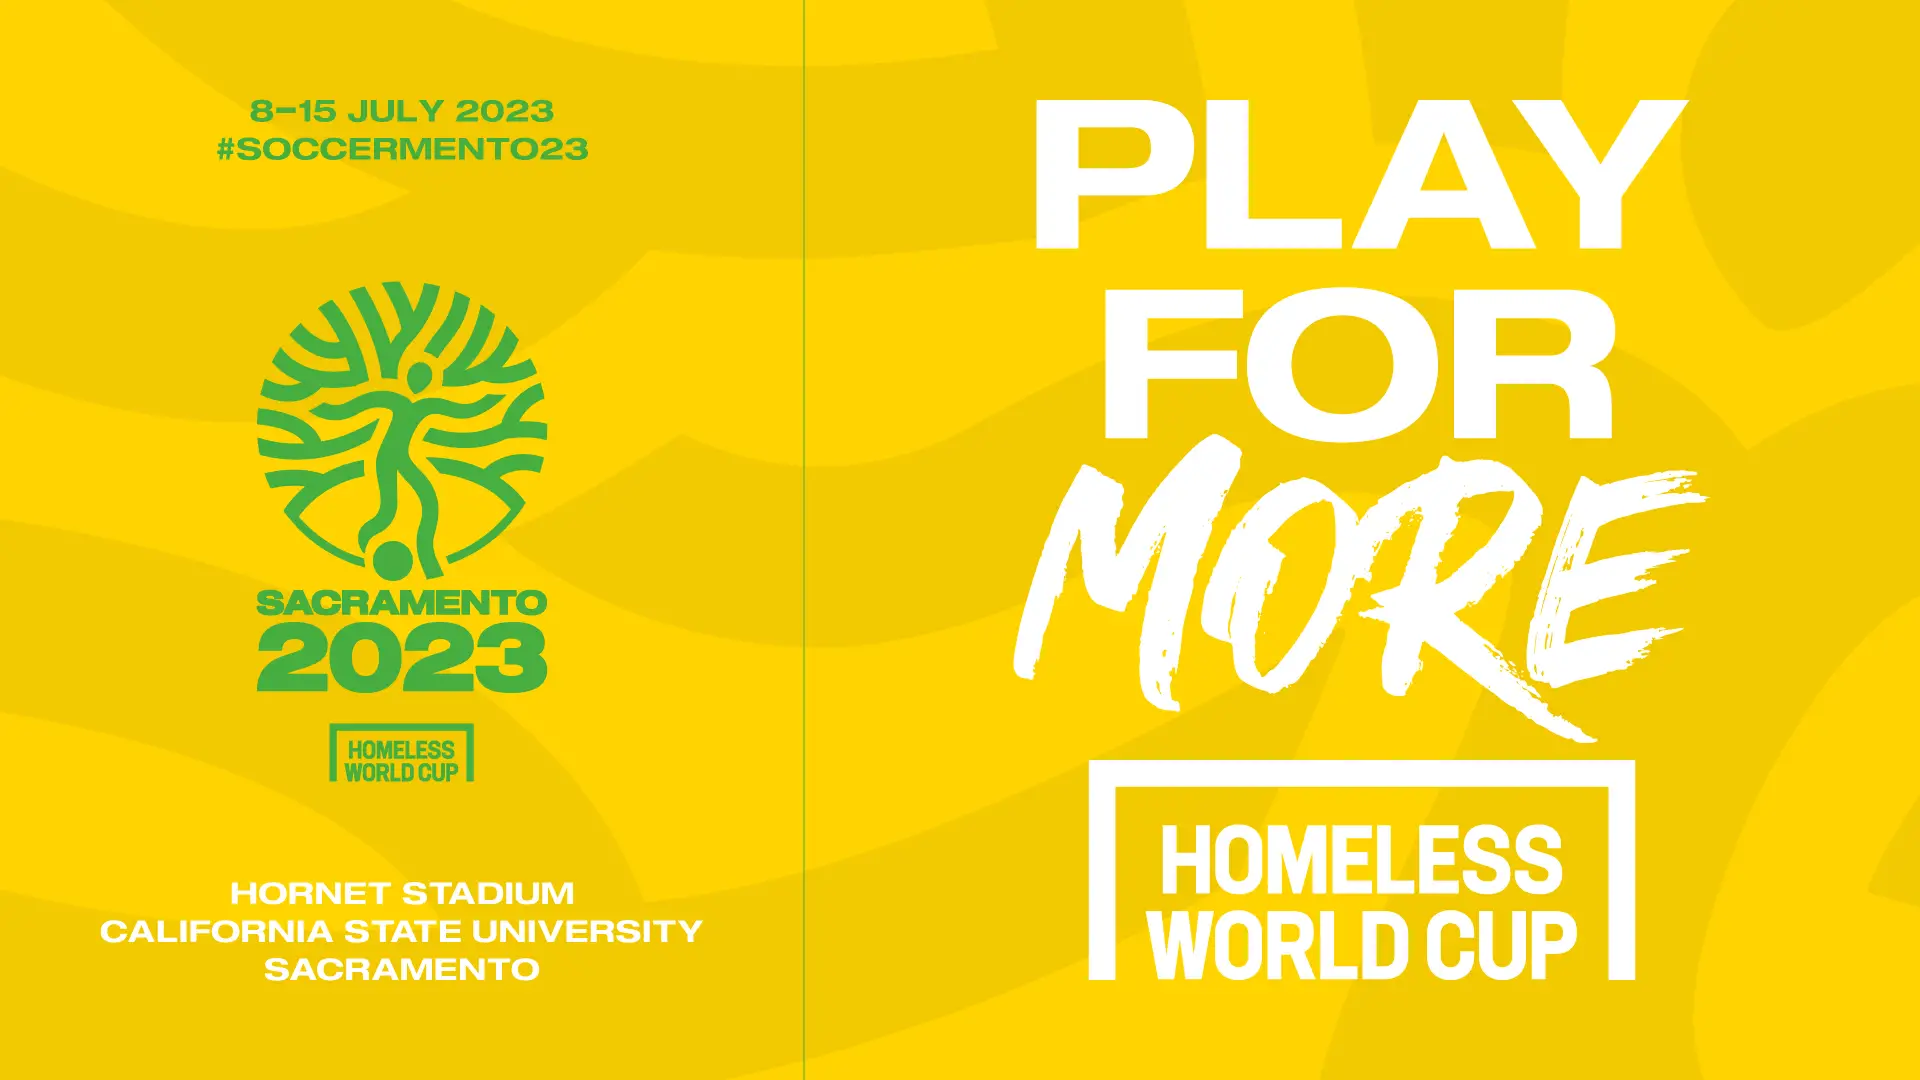 The 2023 Sacramento Homeless World Cup unveils new logo That's All Sport